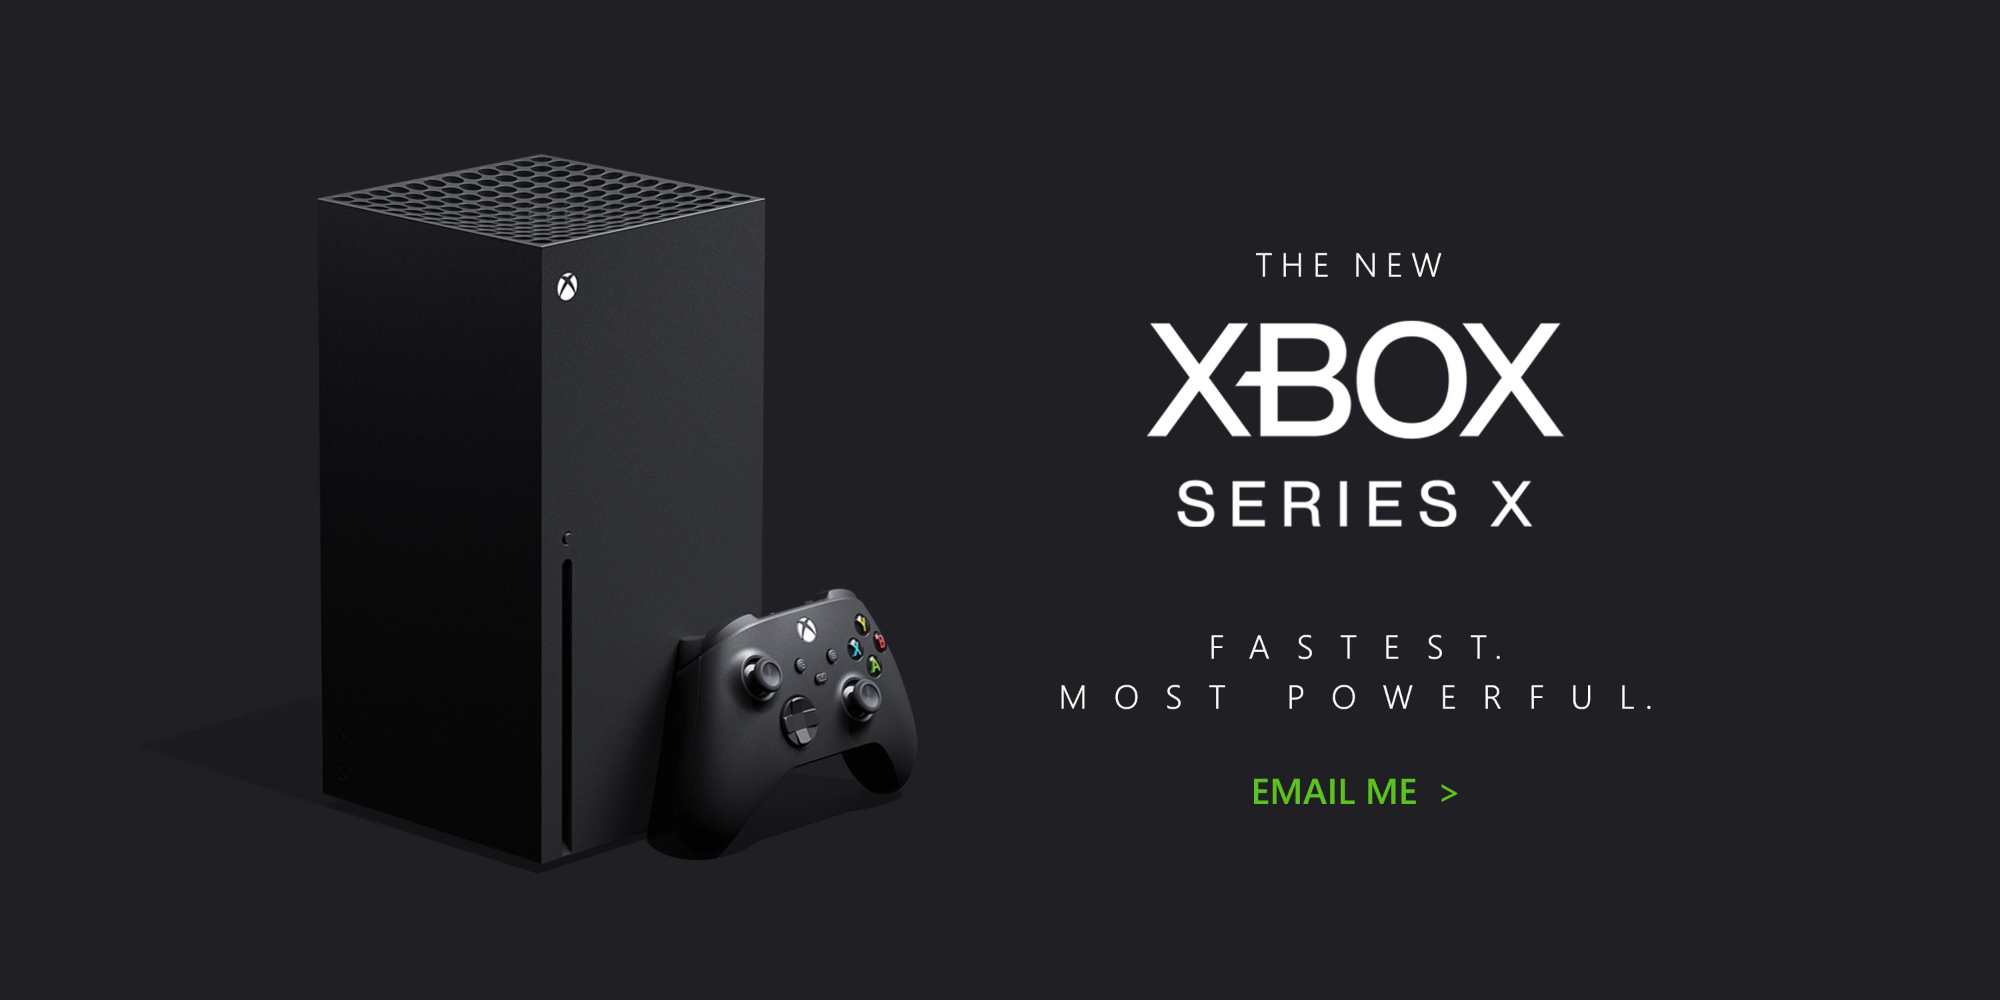 how to get a free xbox series x